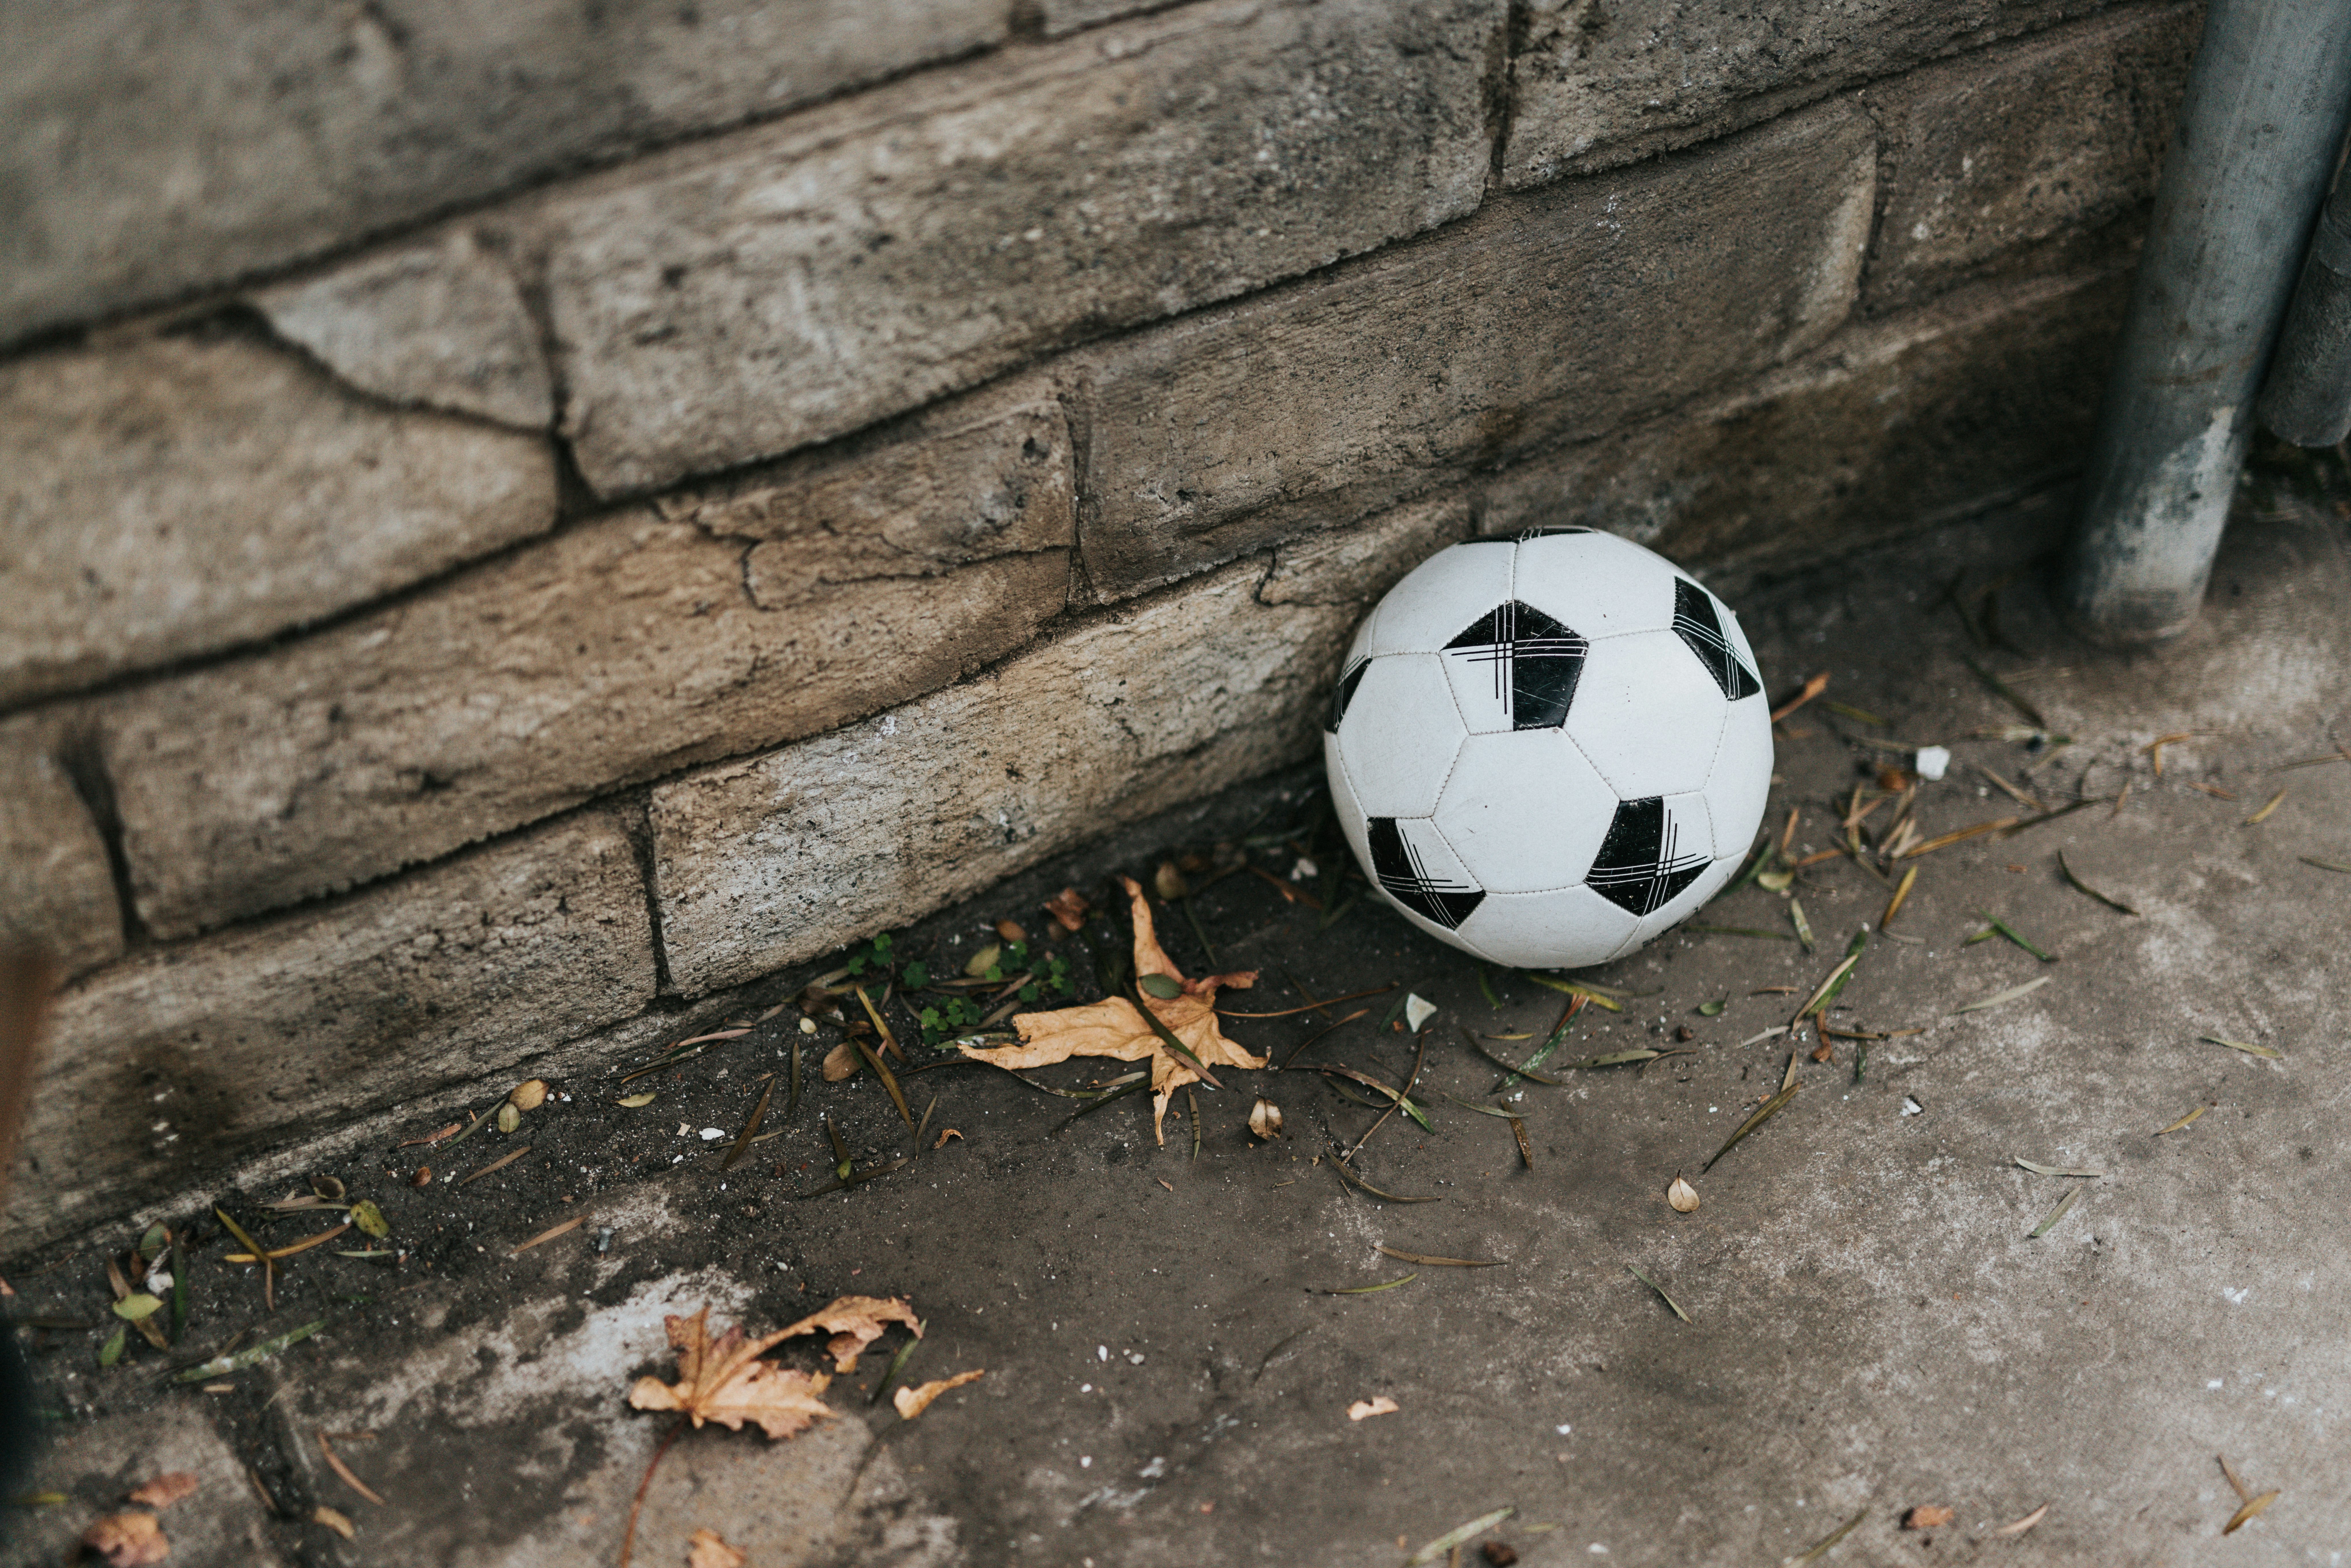 white and black soccer ball on gray concrete wall